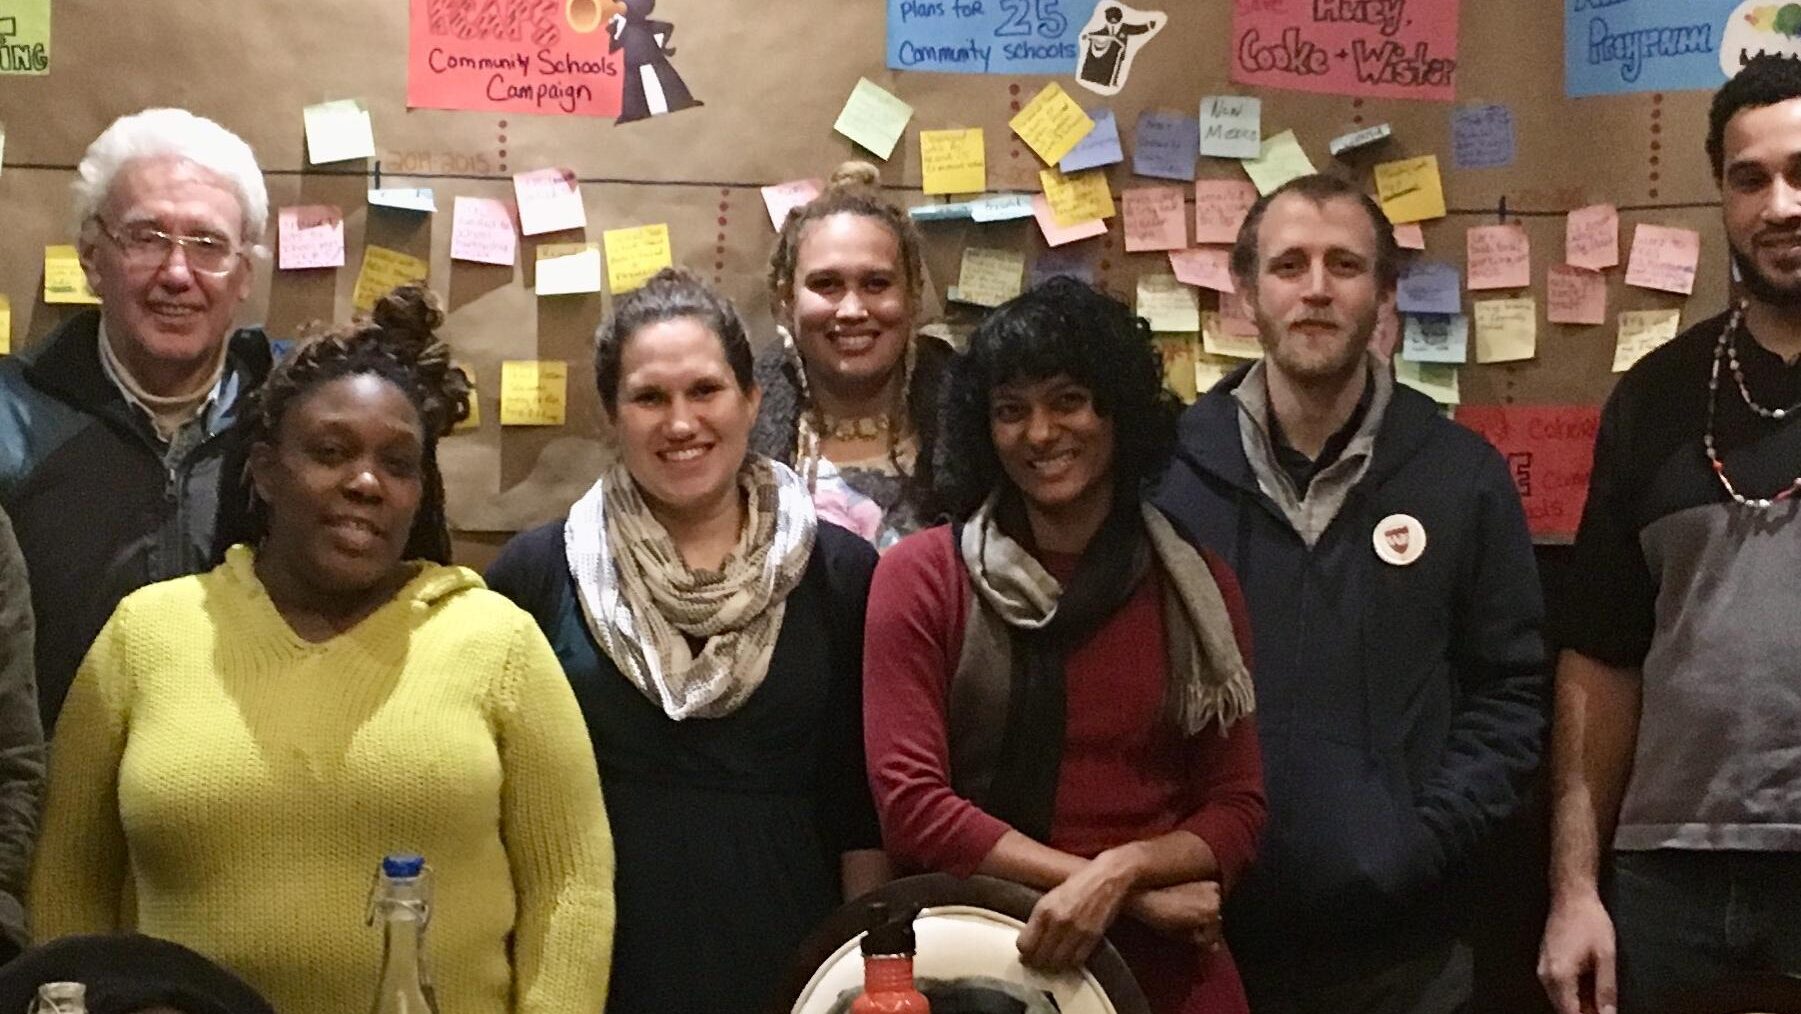 Pep Marie, Shivaani Selvaraj and Kristen Goessling attend a community dinner in 2017 to celebrate the start of a timeline for organizing community schools in Philadelphia.